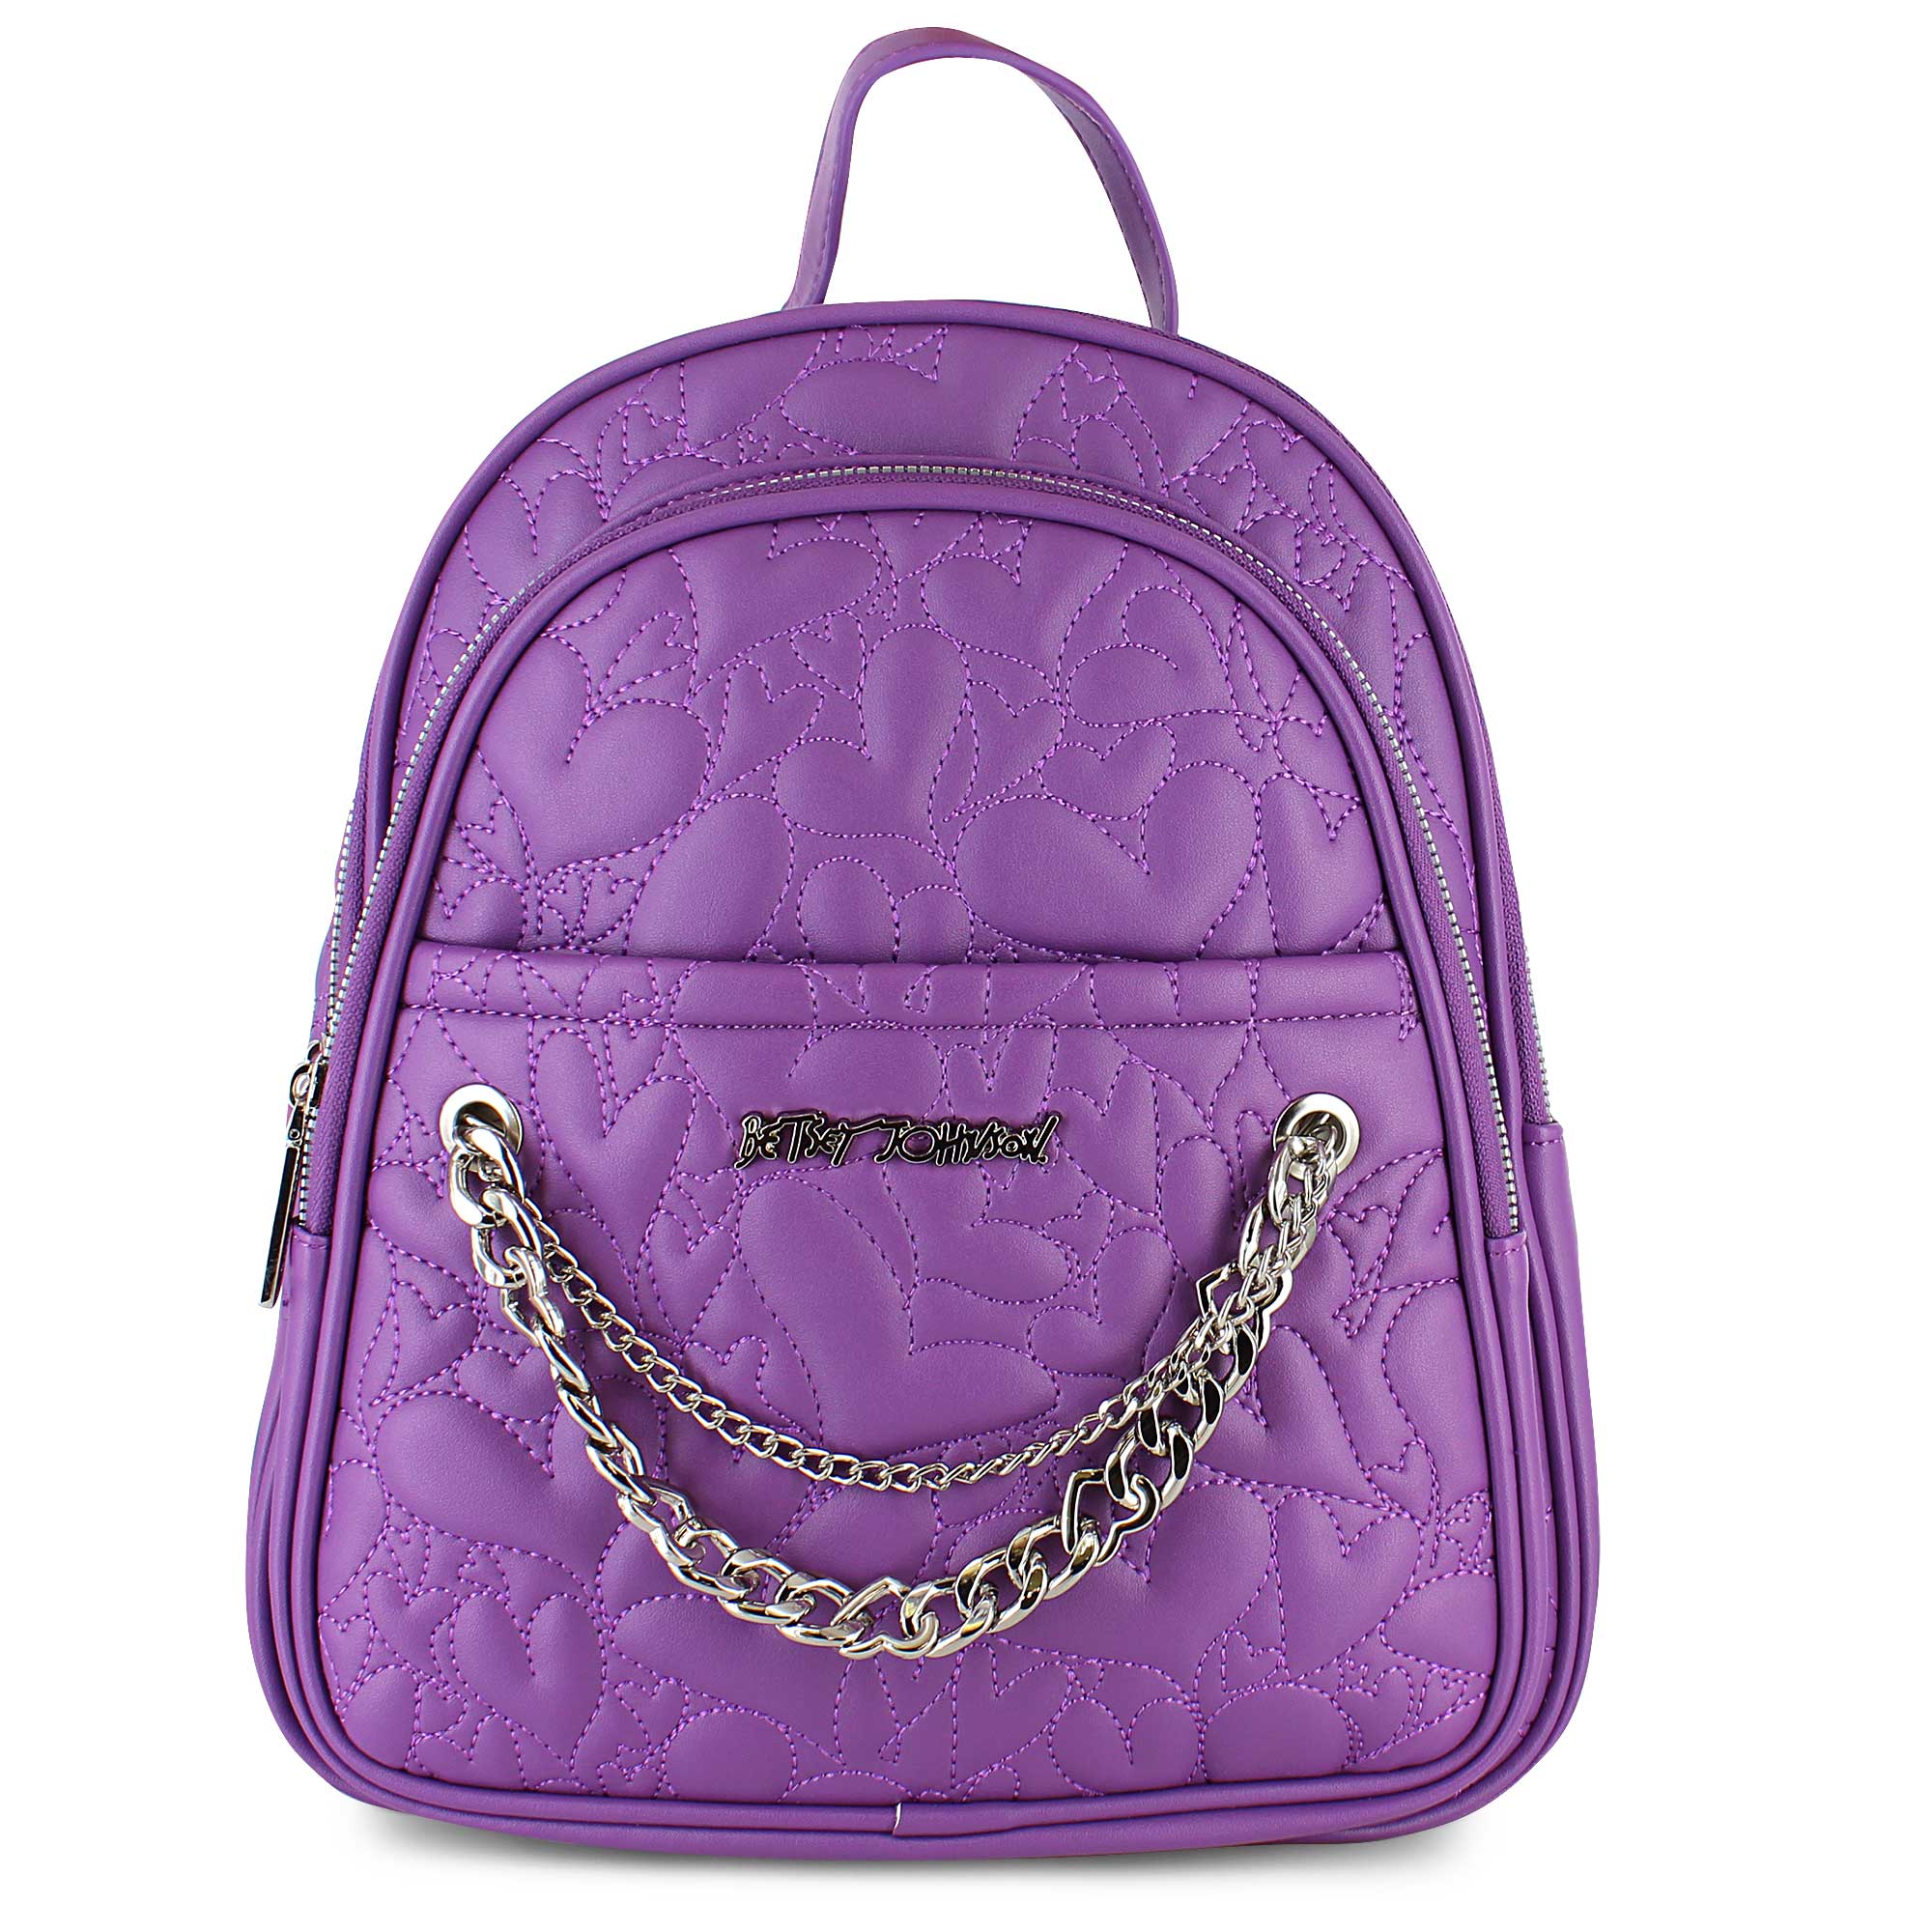 Backpacks, Gym Sacks and Totes | Accessories at SHOE DEPT. ENCORE